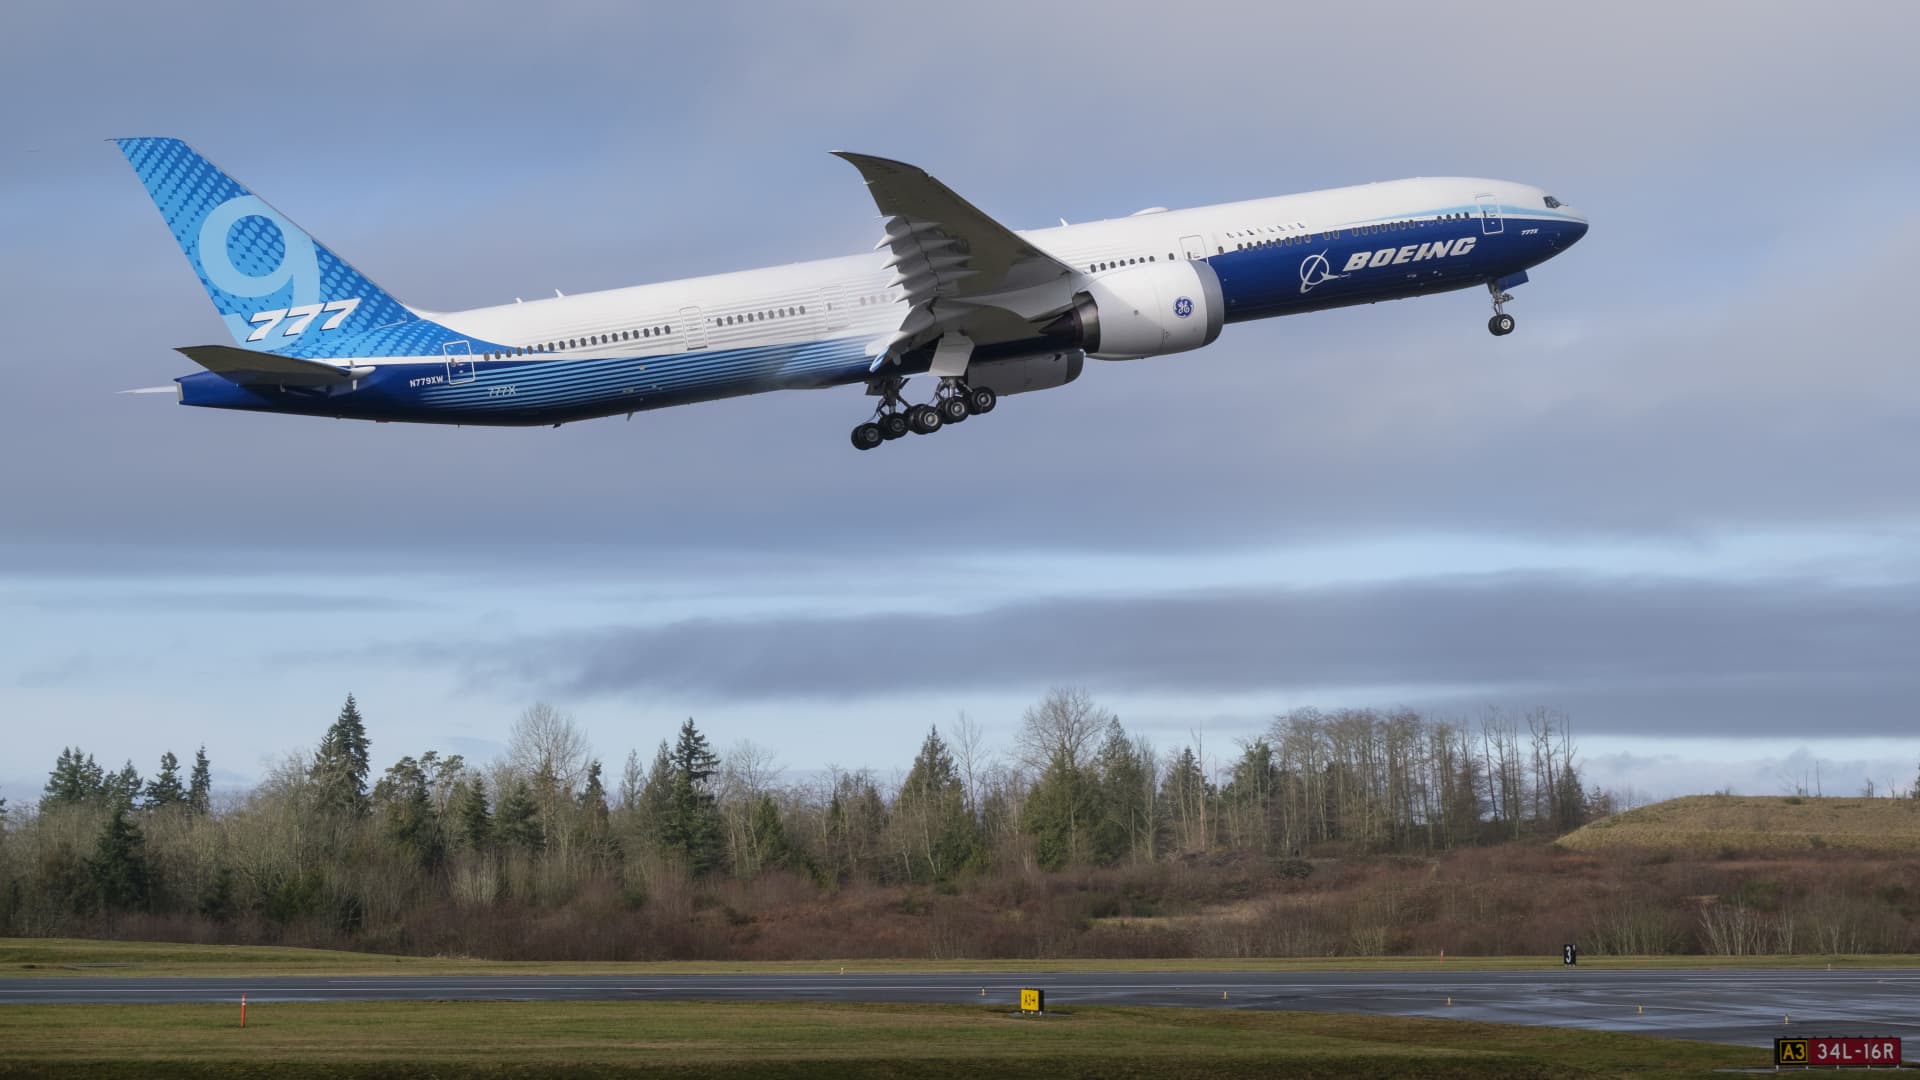 A Boeing 777X airliner lifts off for its first flight at Paine Field on January 25, 2020 in Everett, Washington.